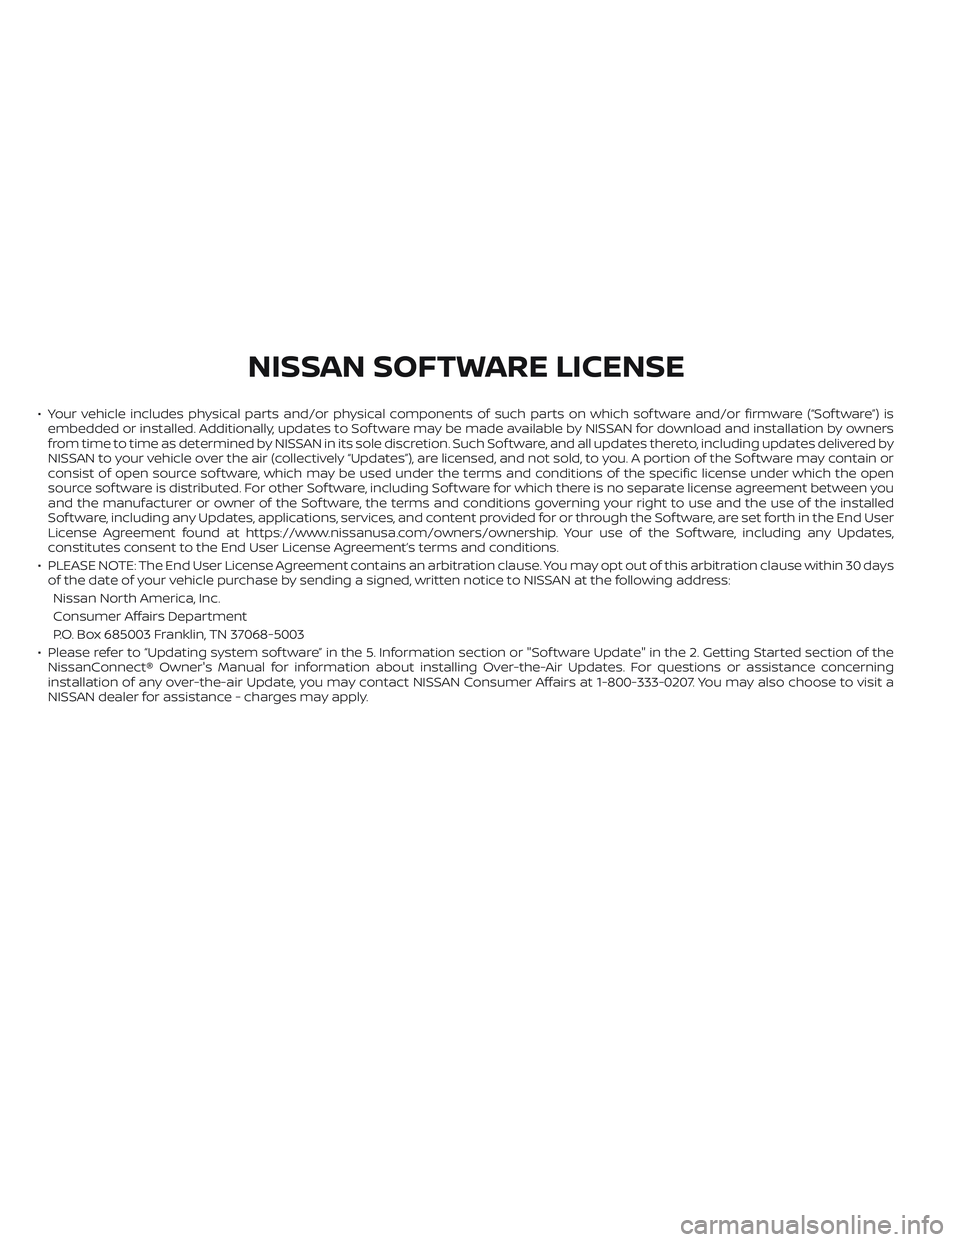 NISSAN FRONTIER 2023  Owners Manual • Your vehicle includes physical parts and/or physical components of such parts on which sof tware and/or firmware (“Sof tware”) isembedded or installed. Additionally, updates to Sof tware may b